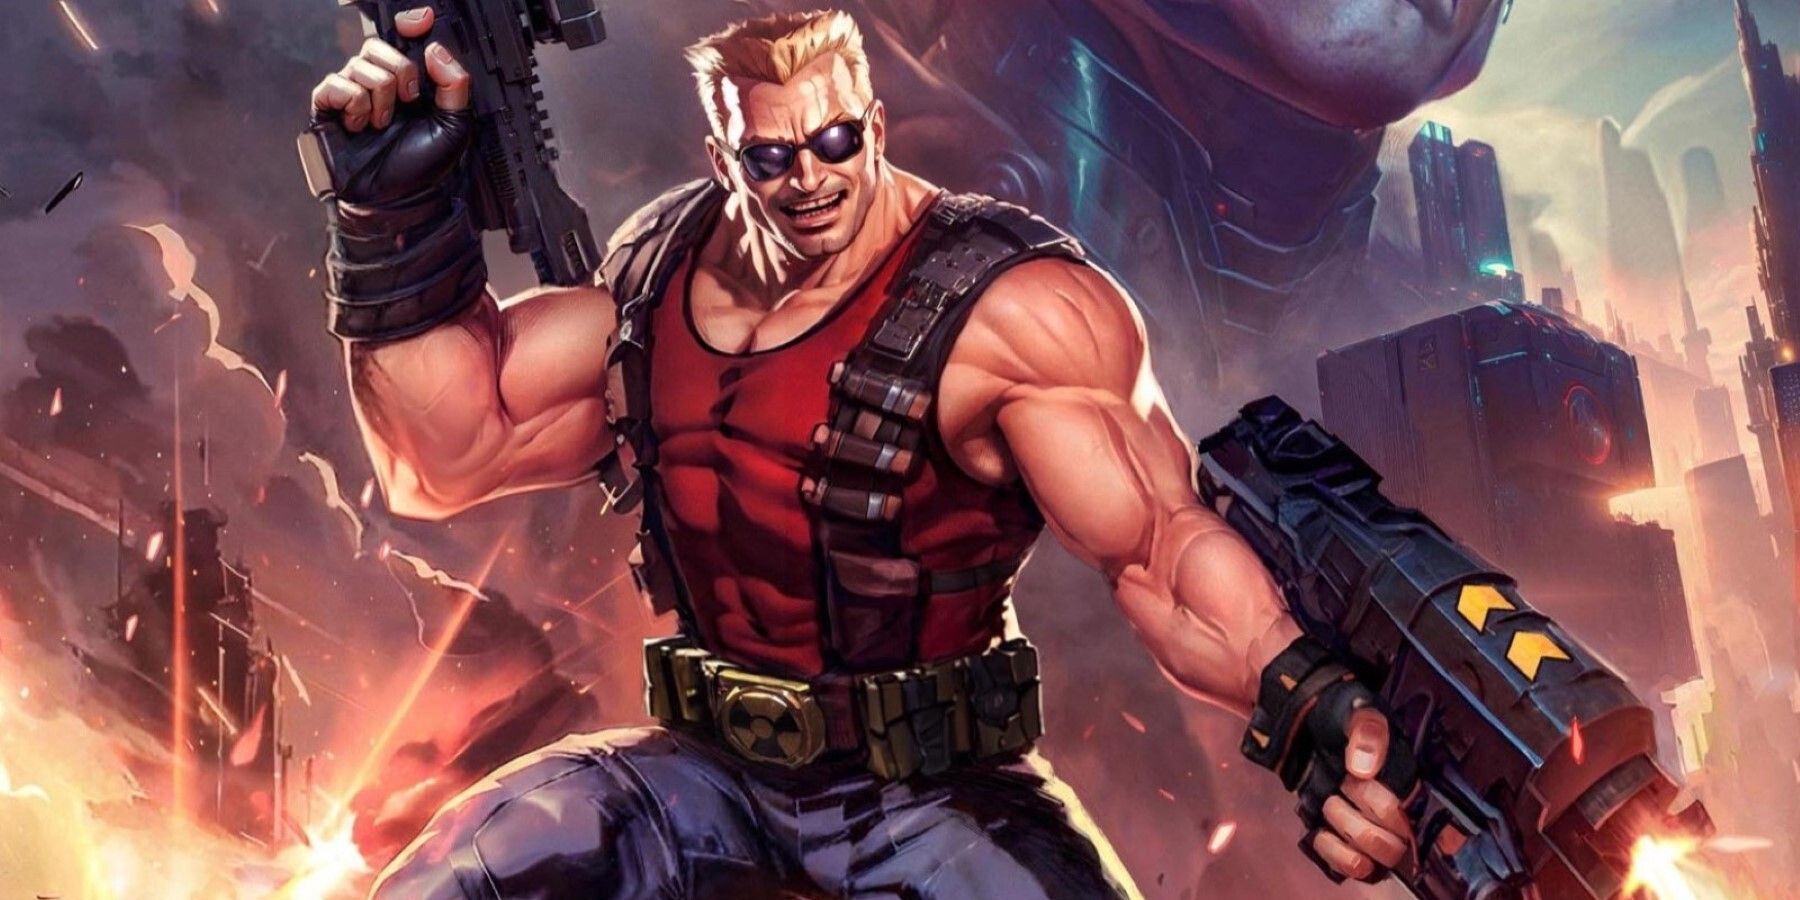 Character Duke Nukem wields two guns as explosions go off behind him